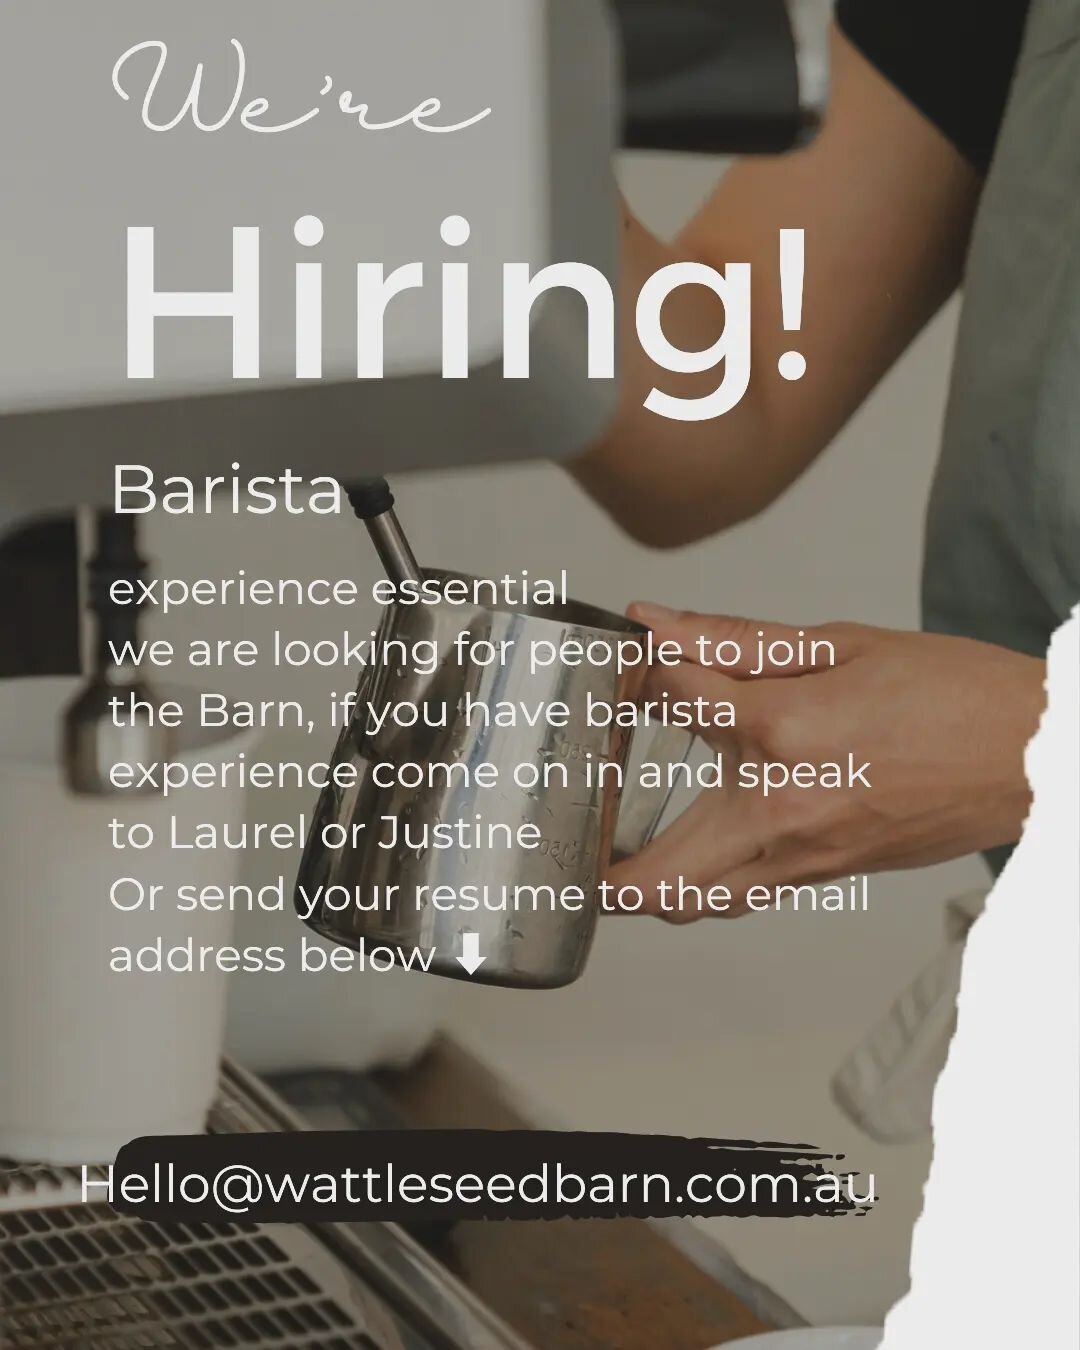 If you're an experienced Barista, we are looking for YOU!

Come into the Barn and ask for Laurel or Justine.